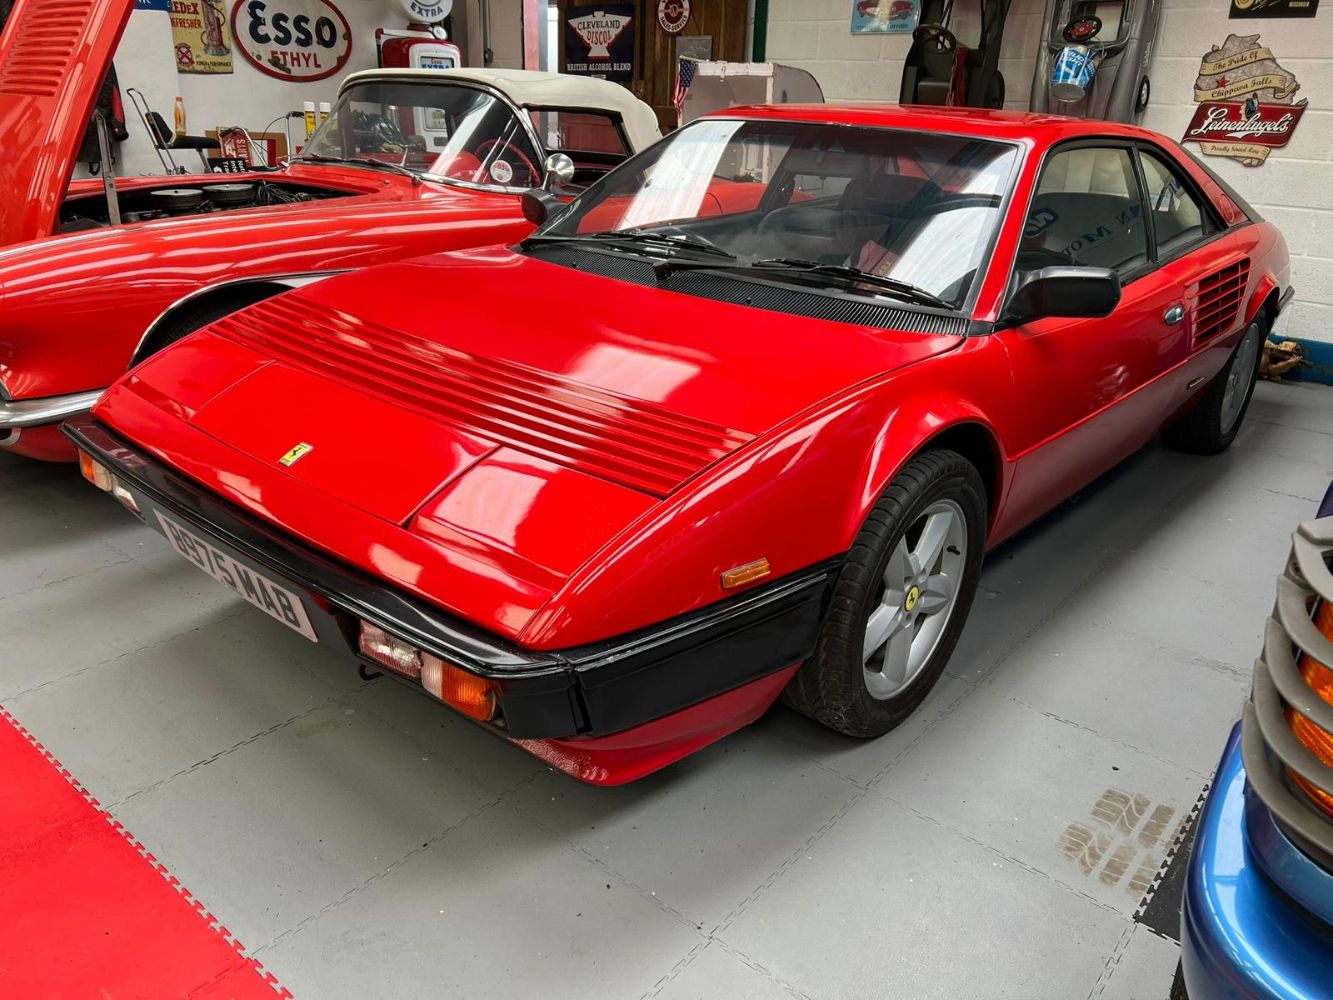 The Somerset Collection of Classic Vehicles - Timed Online Only Auction